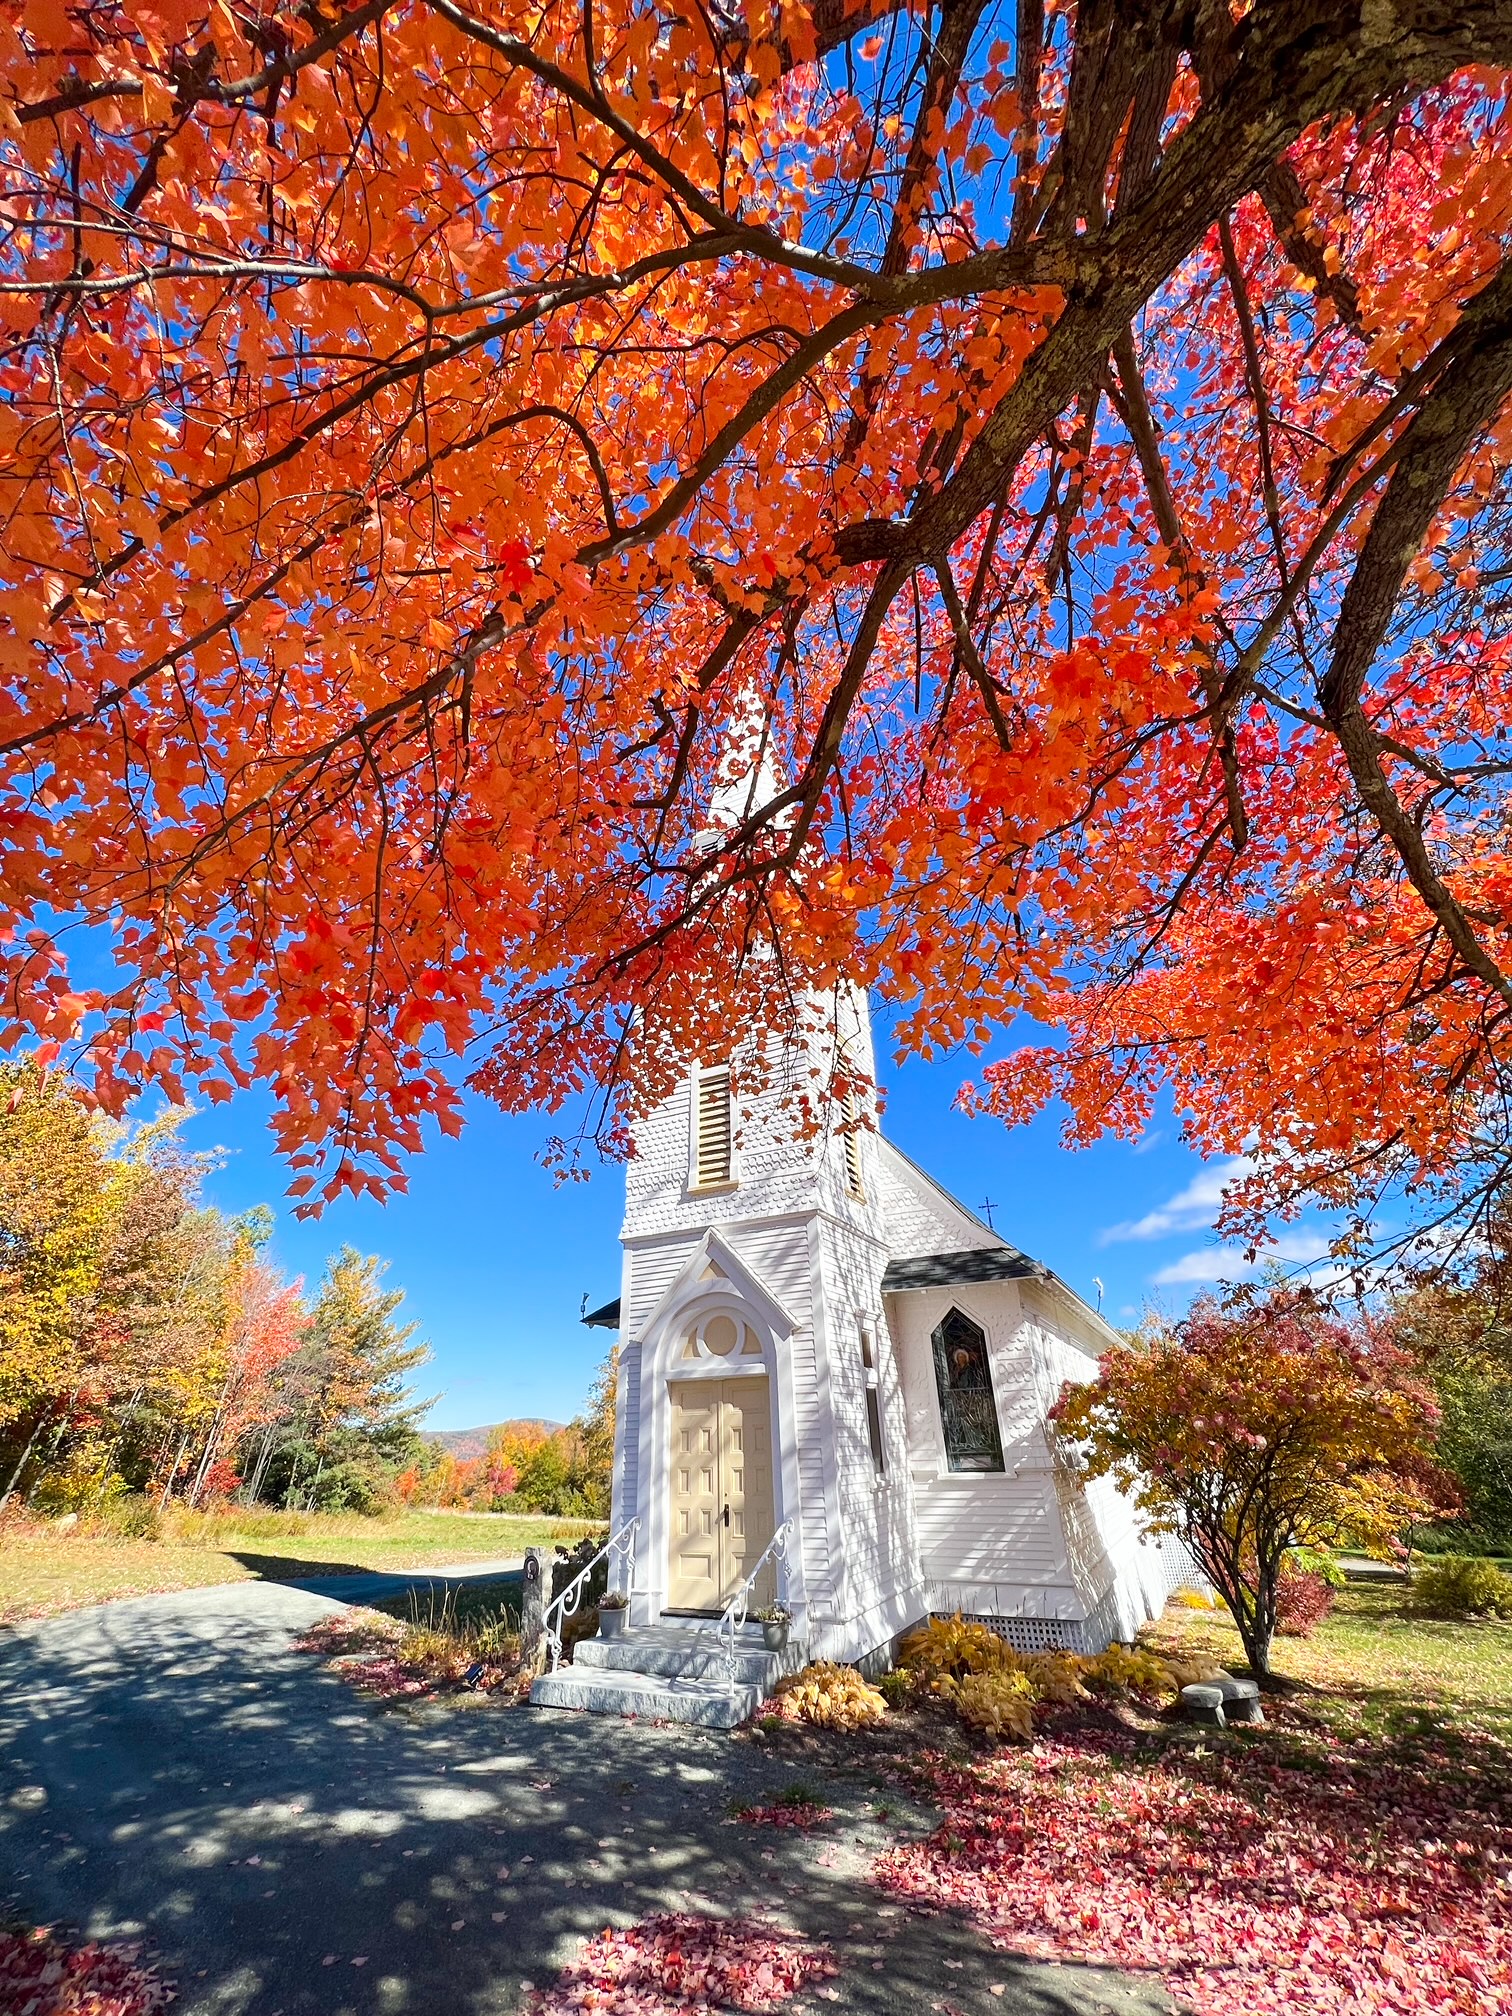 A beautiful white chapel known as St. Matthew's Chapel is so picturesque: the color is a bright contrast to the red leaves surrounding the quaint building. 